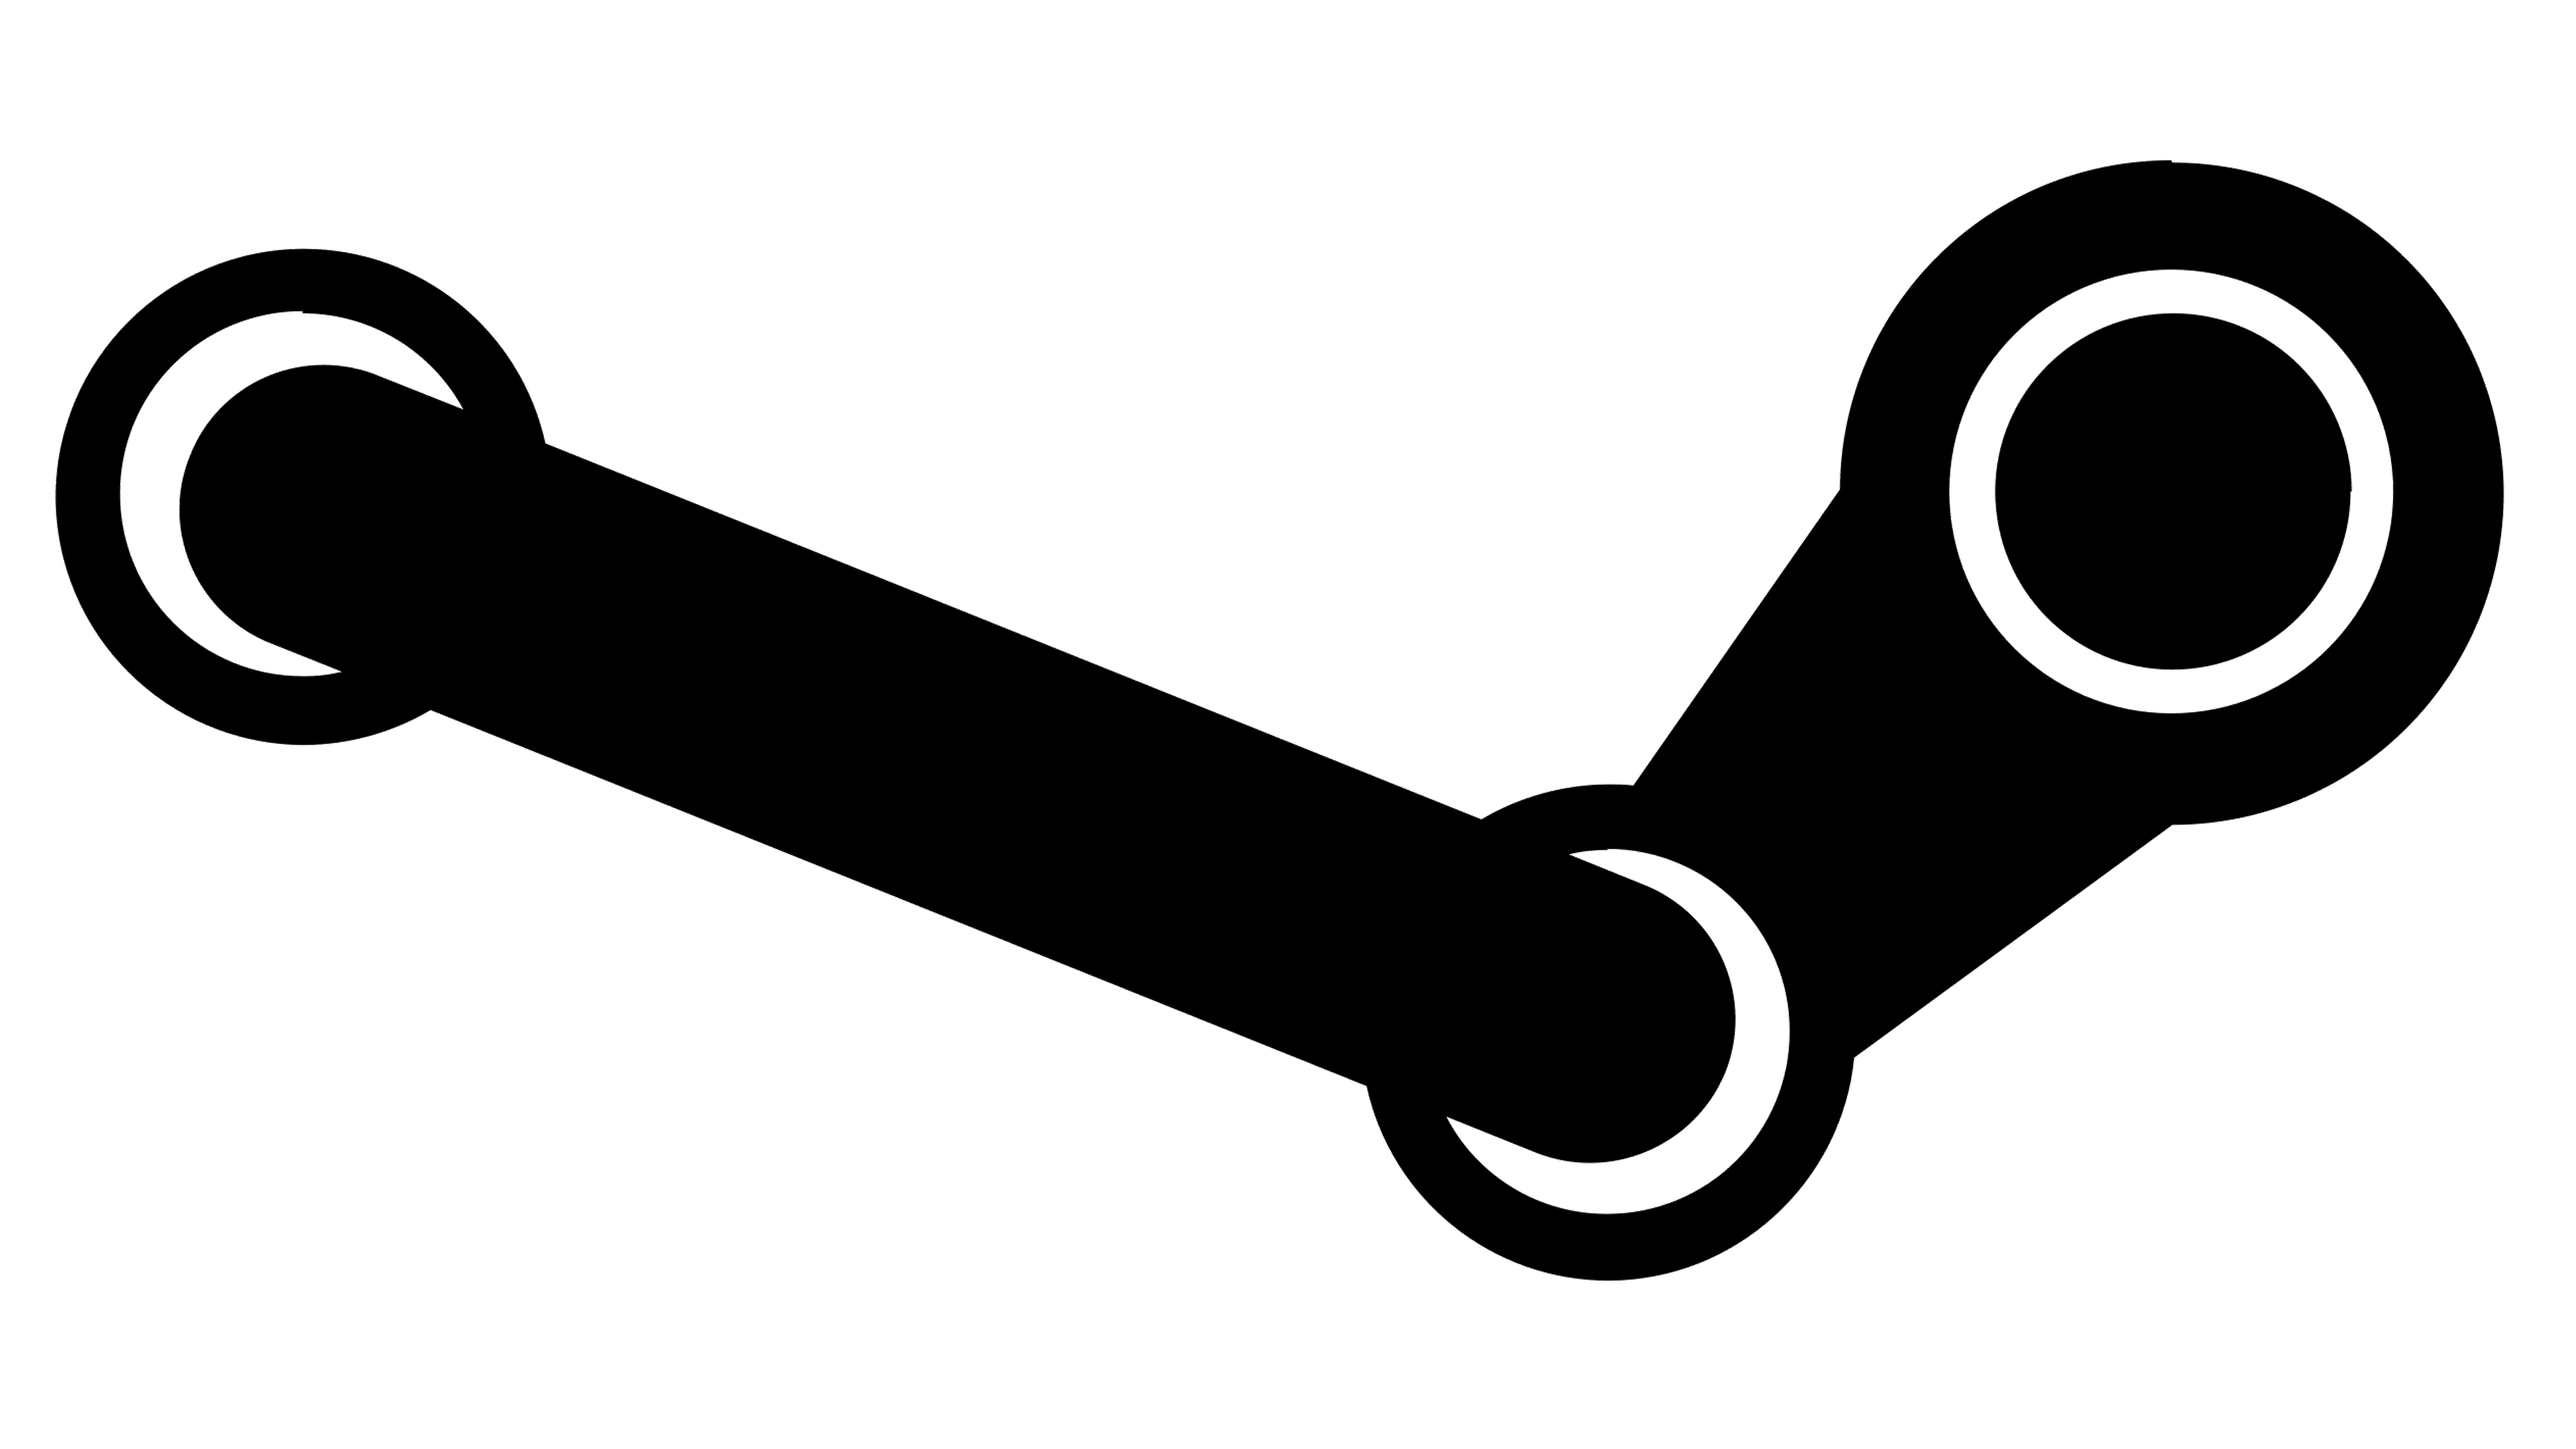 Steam Logo and symbol, meaning, history, sign.